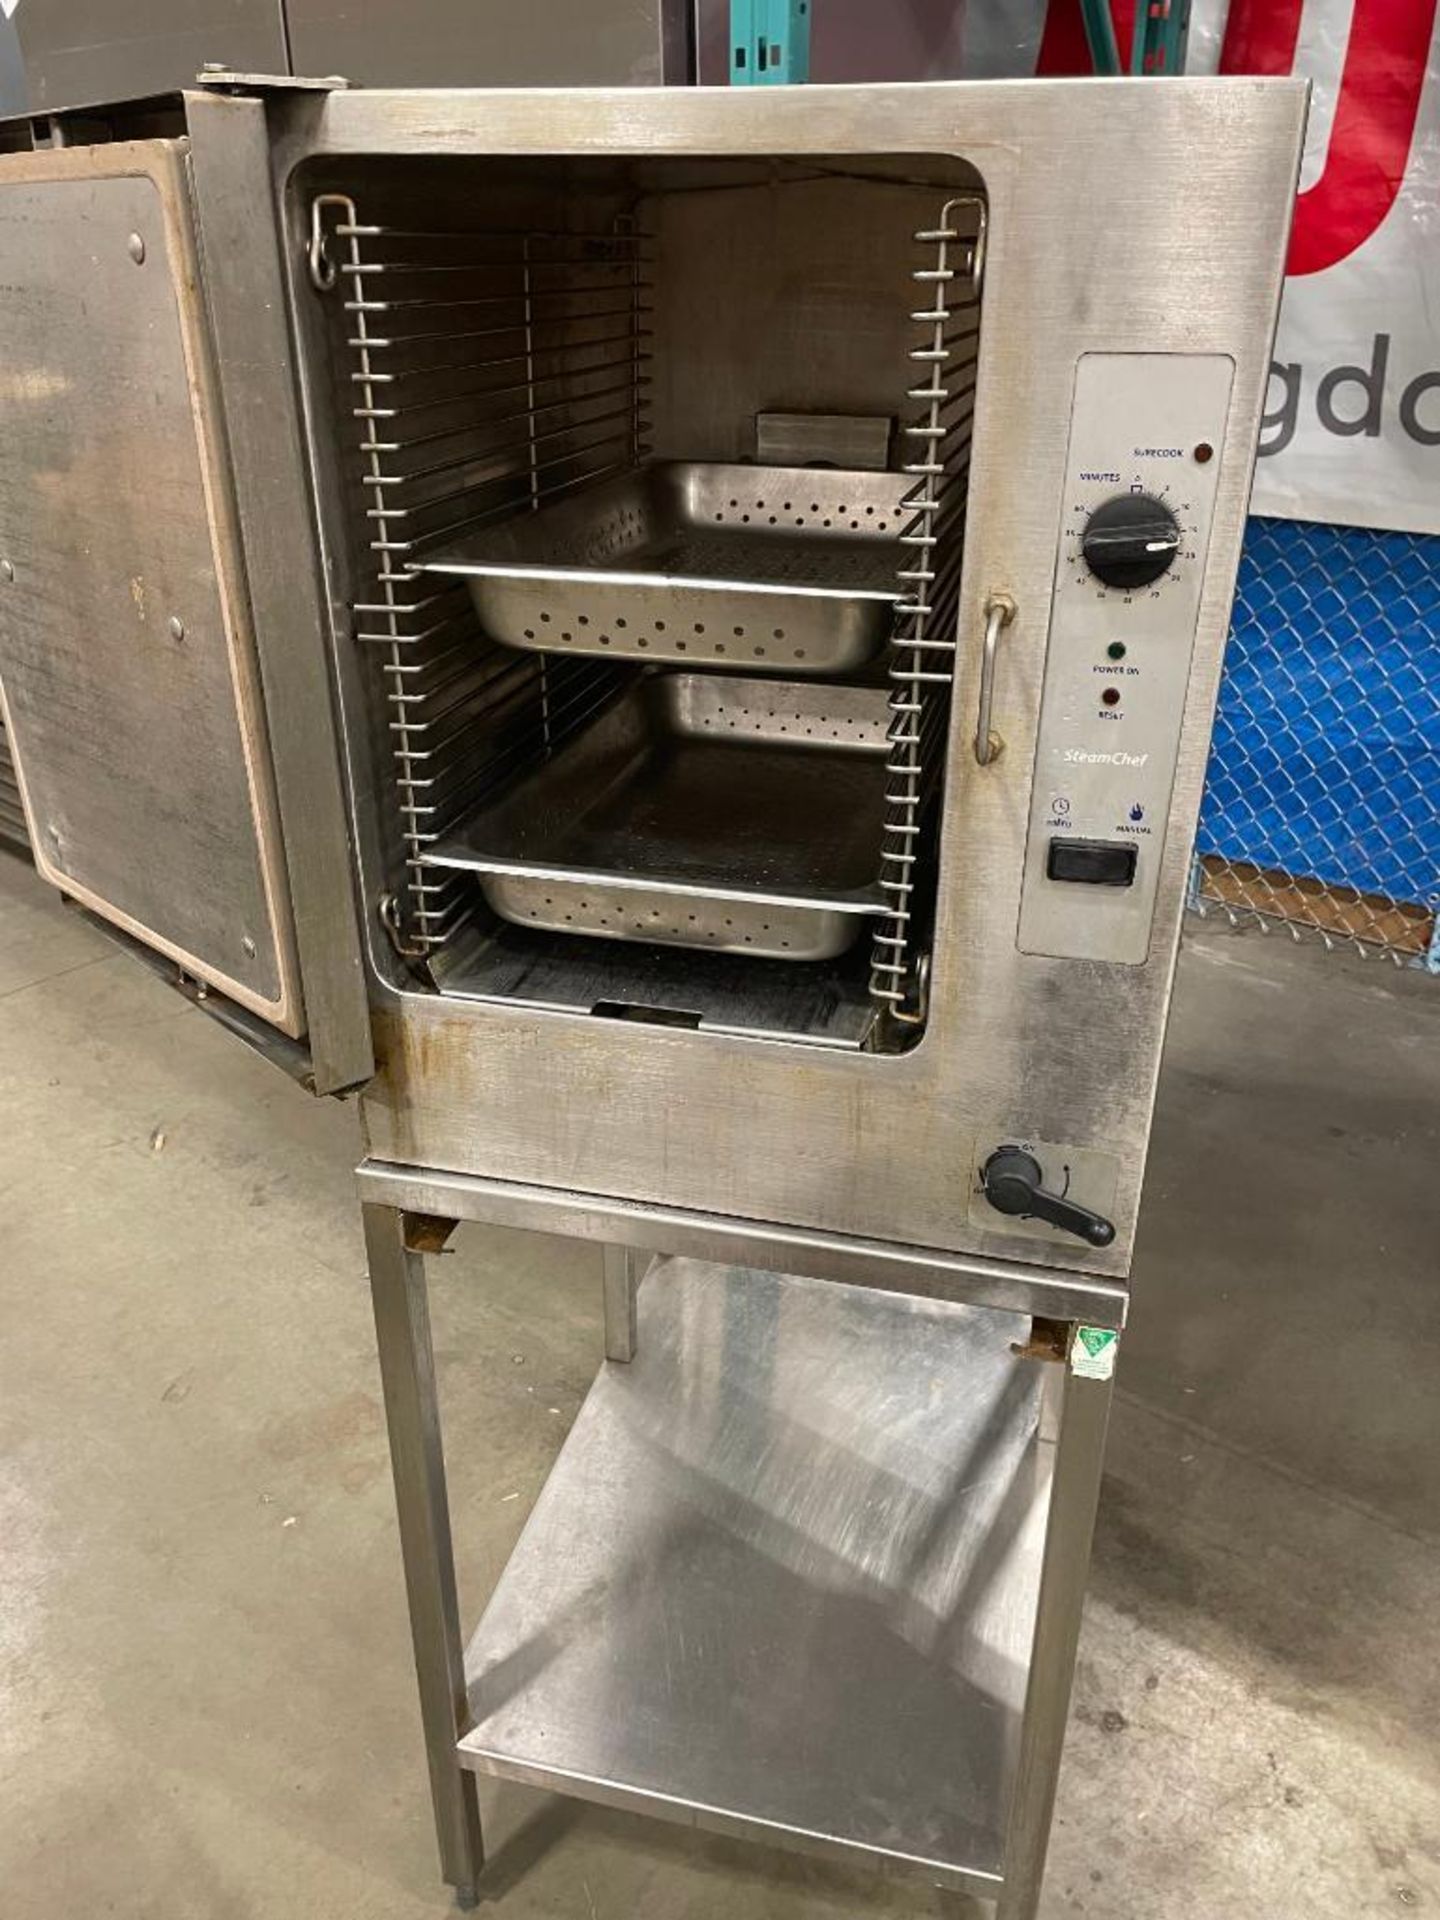 CLEVELAND 22CET6.1 ELECTRIC BOILERLESS CONVECTION STEAMER WITH STAND - Image 11 of 13